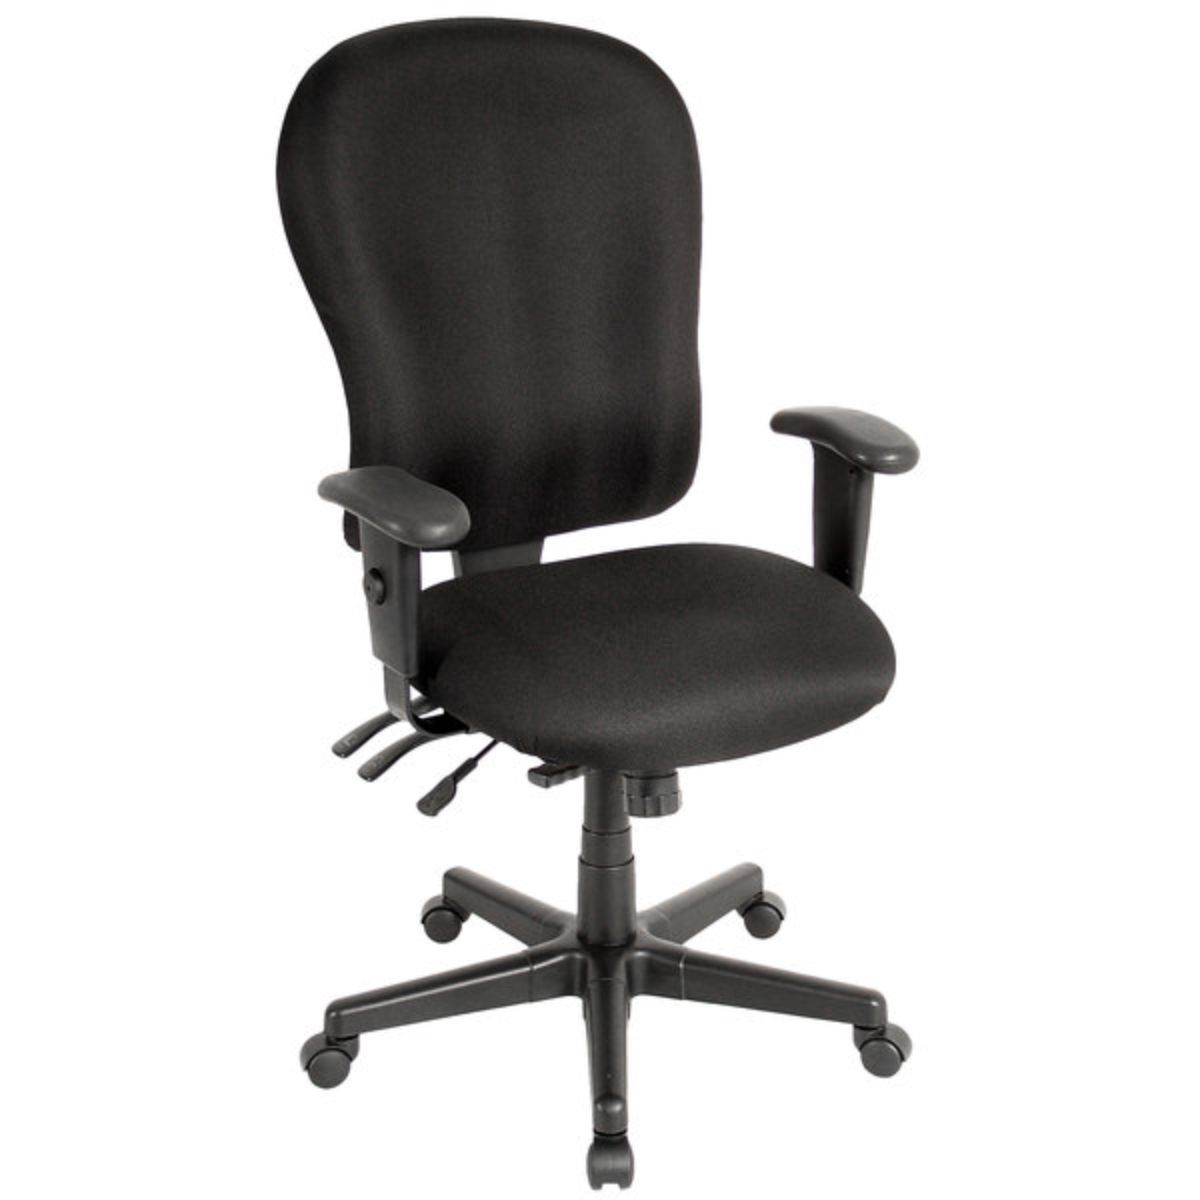 Black Adjustable Swivel Fabric Rolling Office Chair-372355-1